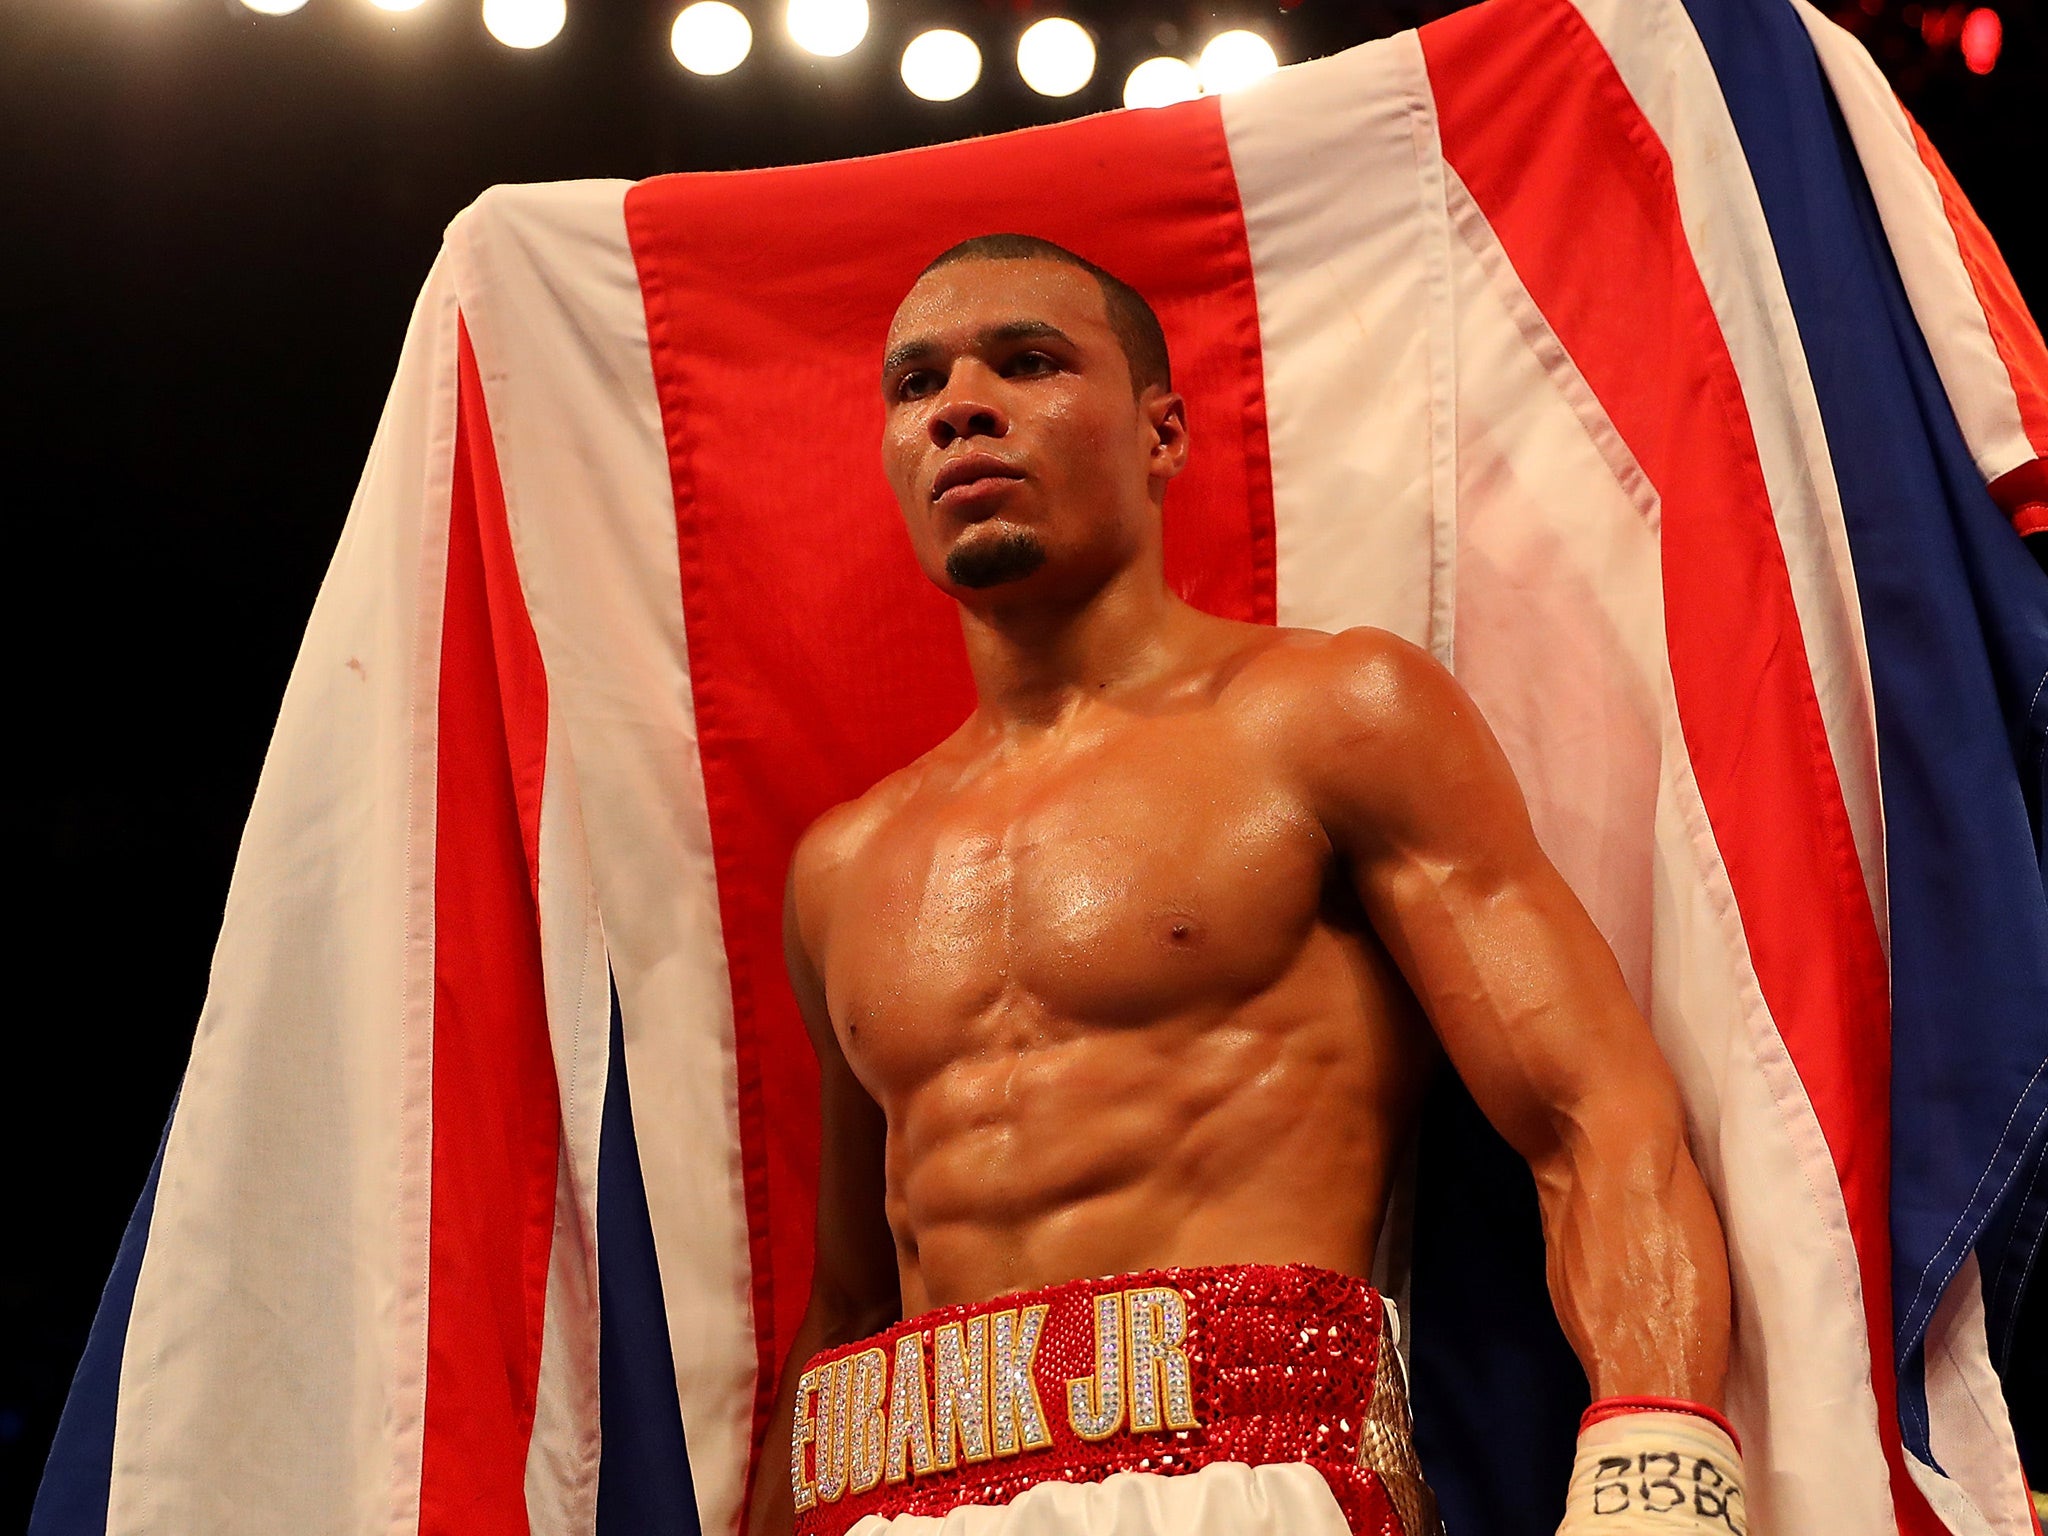 Chris Eubank Jr Calls Out James Degale Billy Joe Saunders And Gennady Golovkin As He Prepares